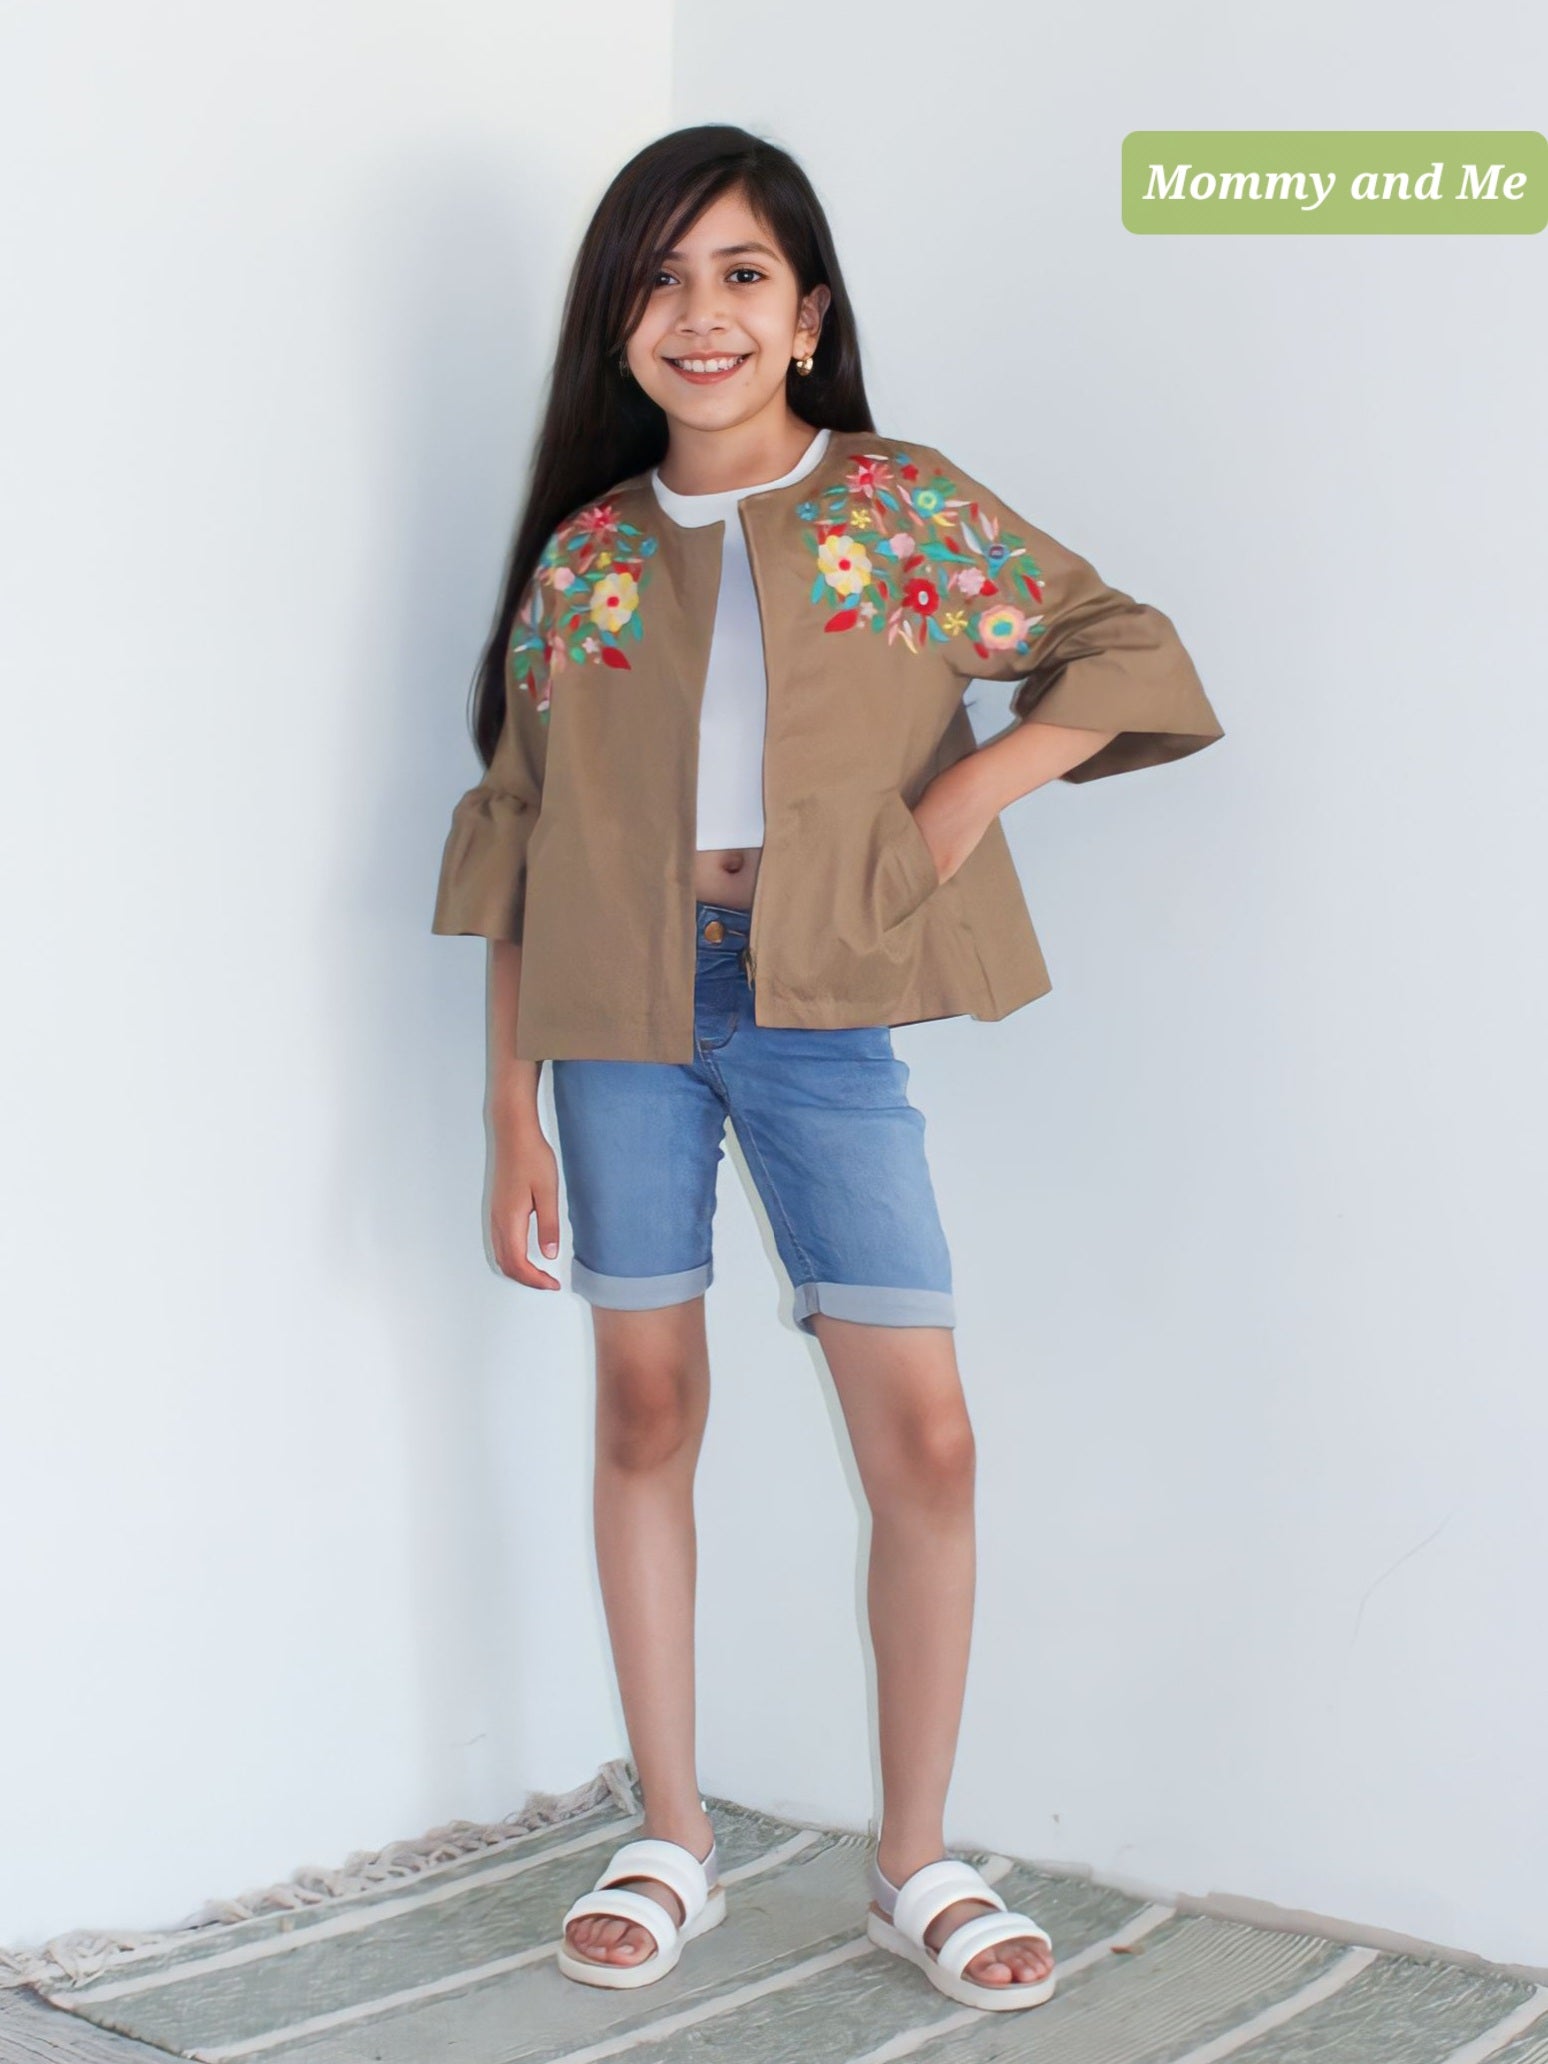 Embroidered Flores Jacket For Girls